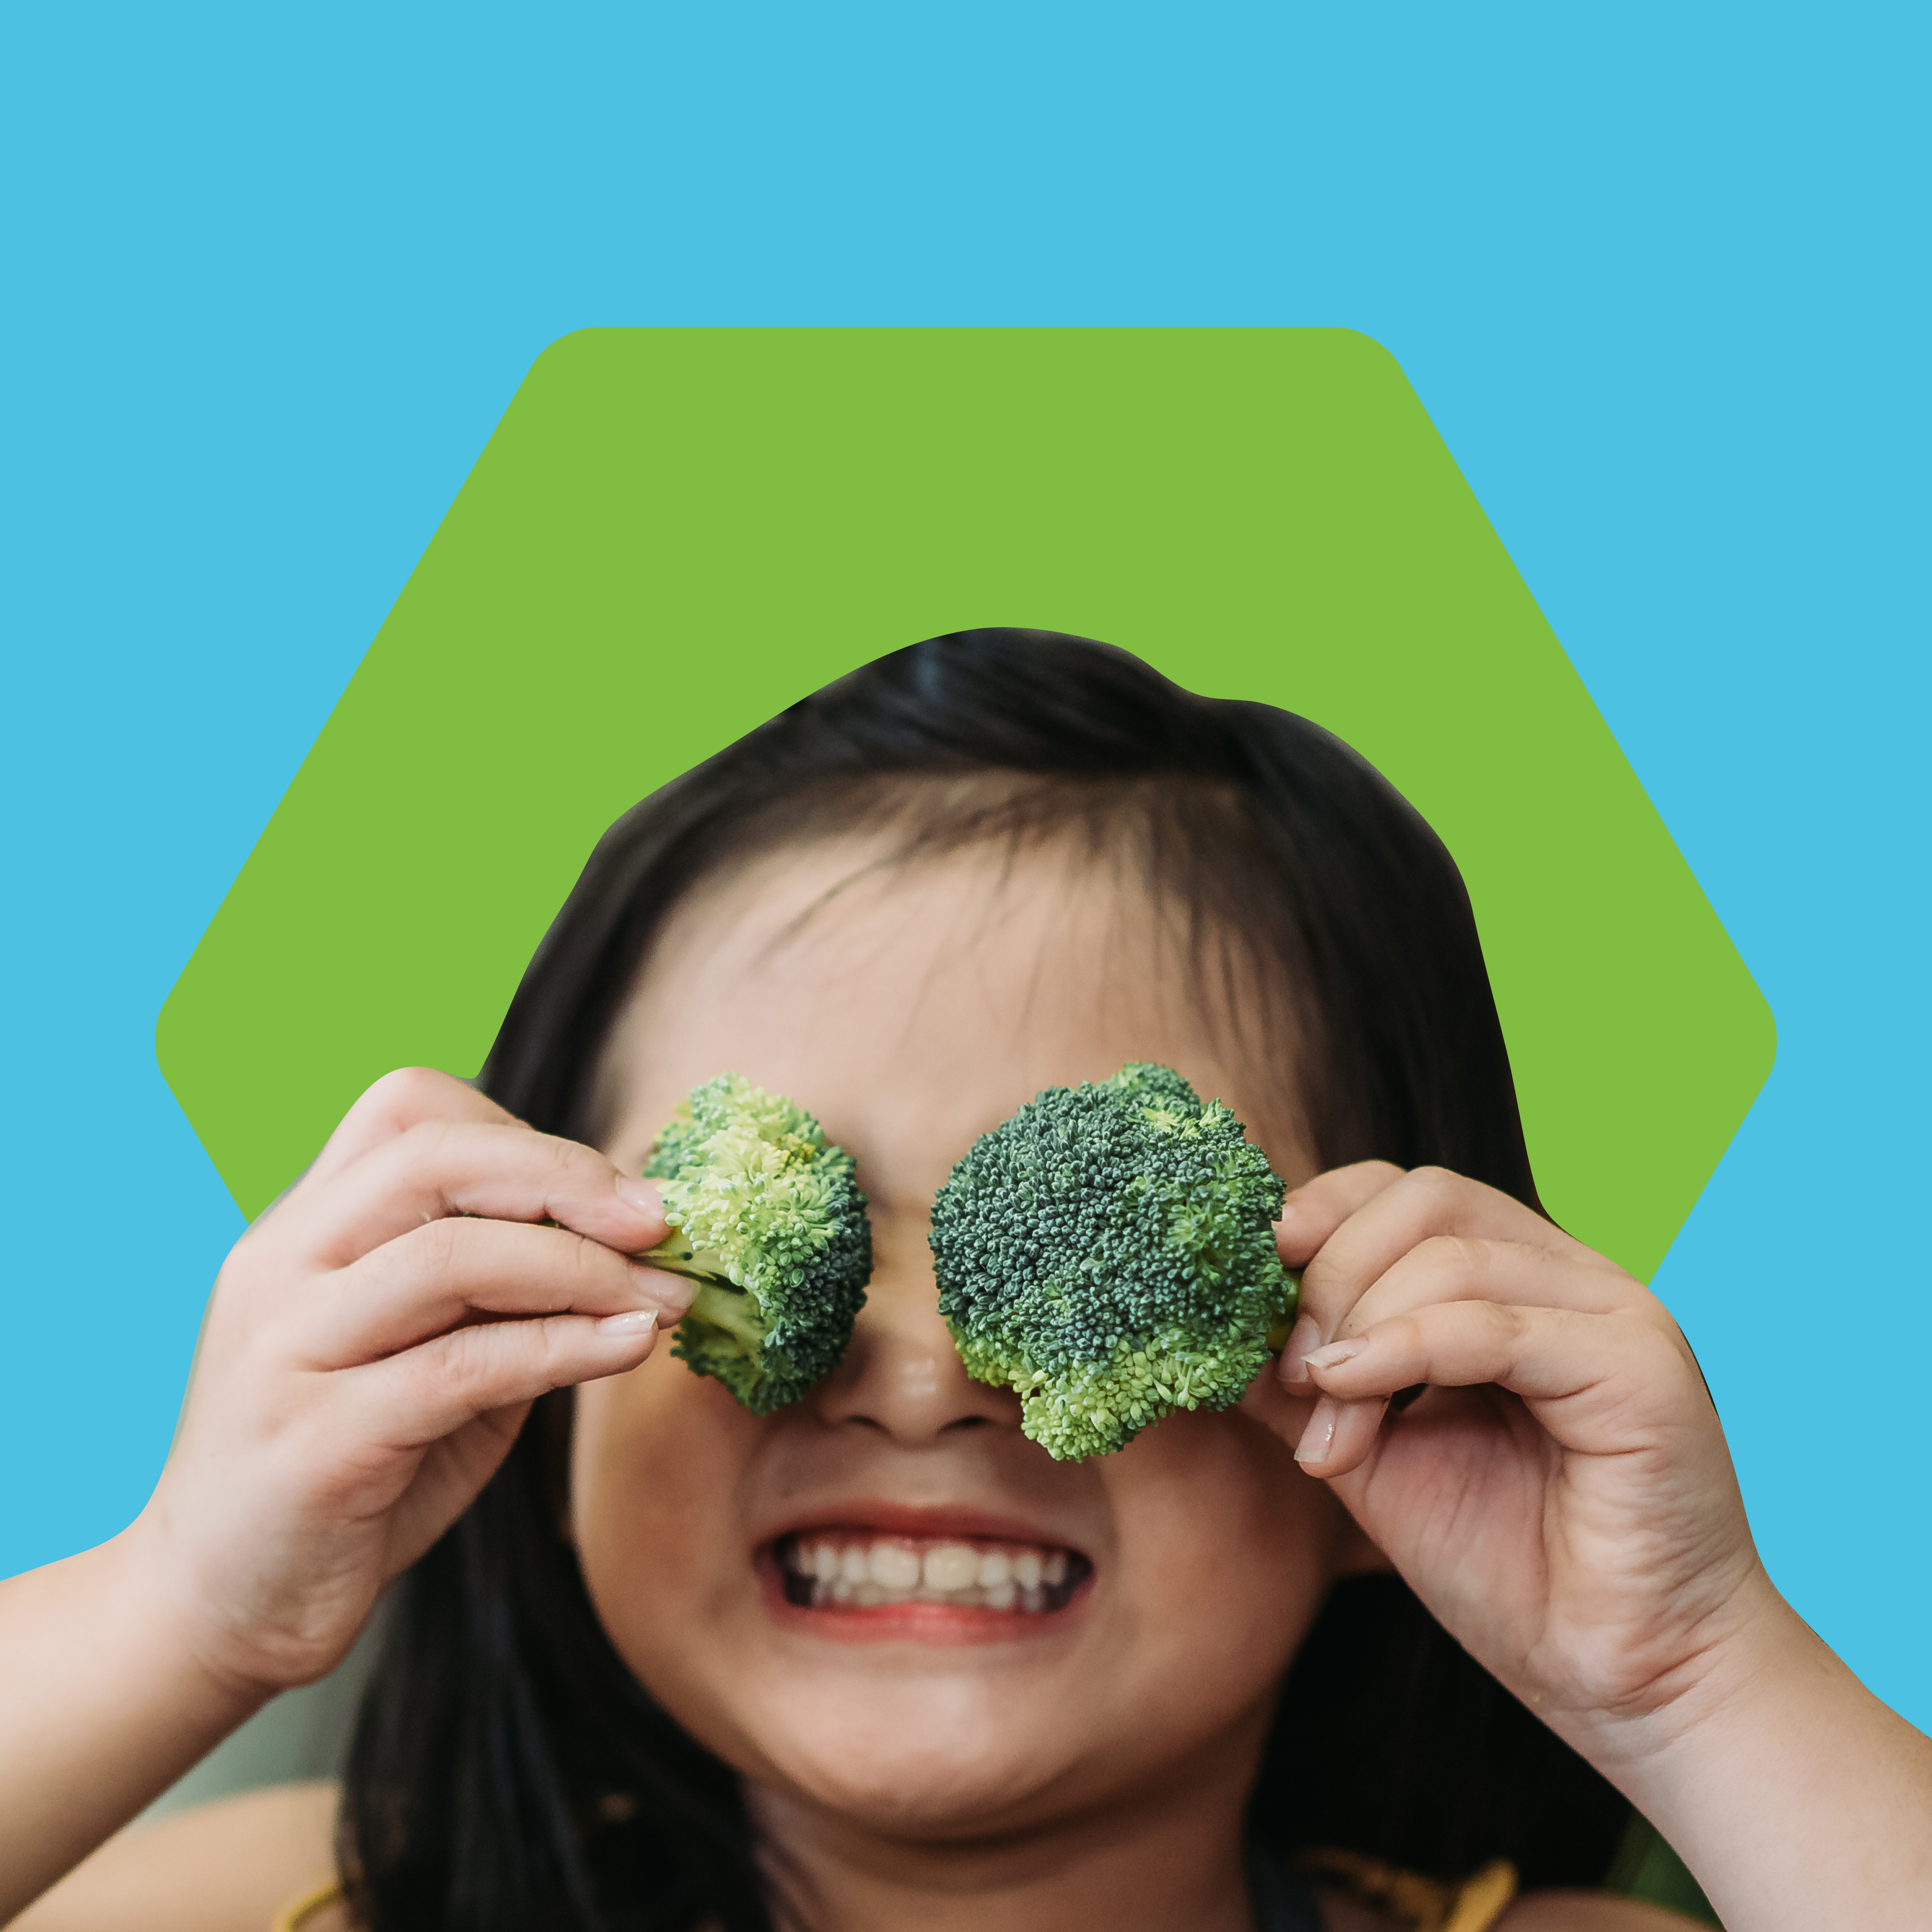 Healthy School Meals for All social media image of child with broccoli